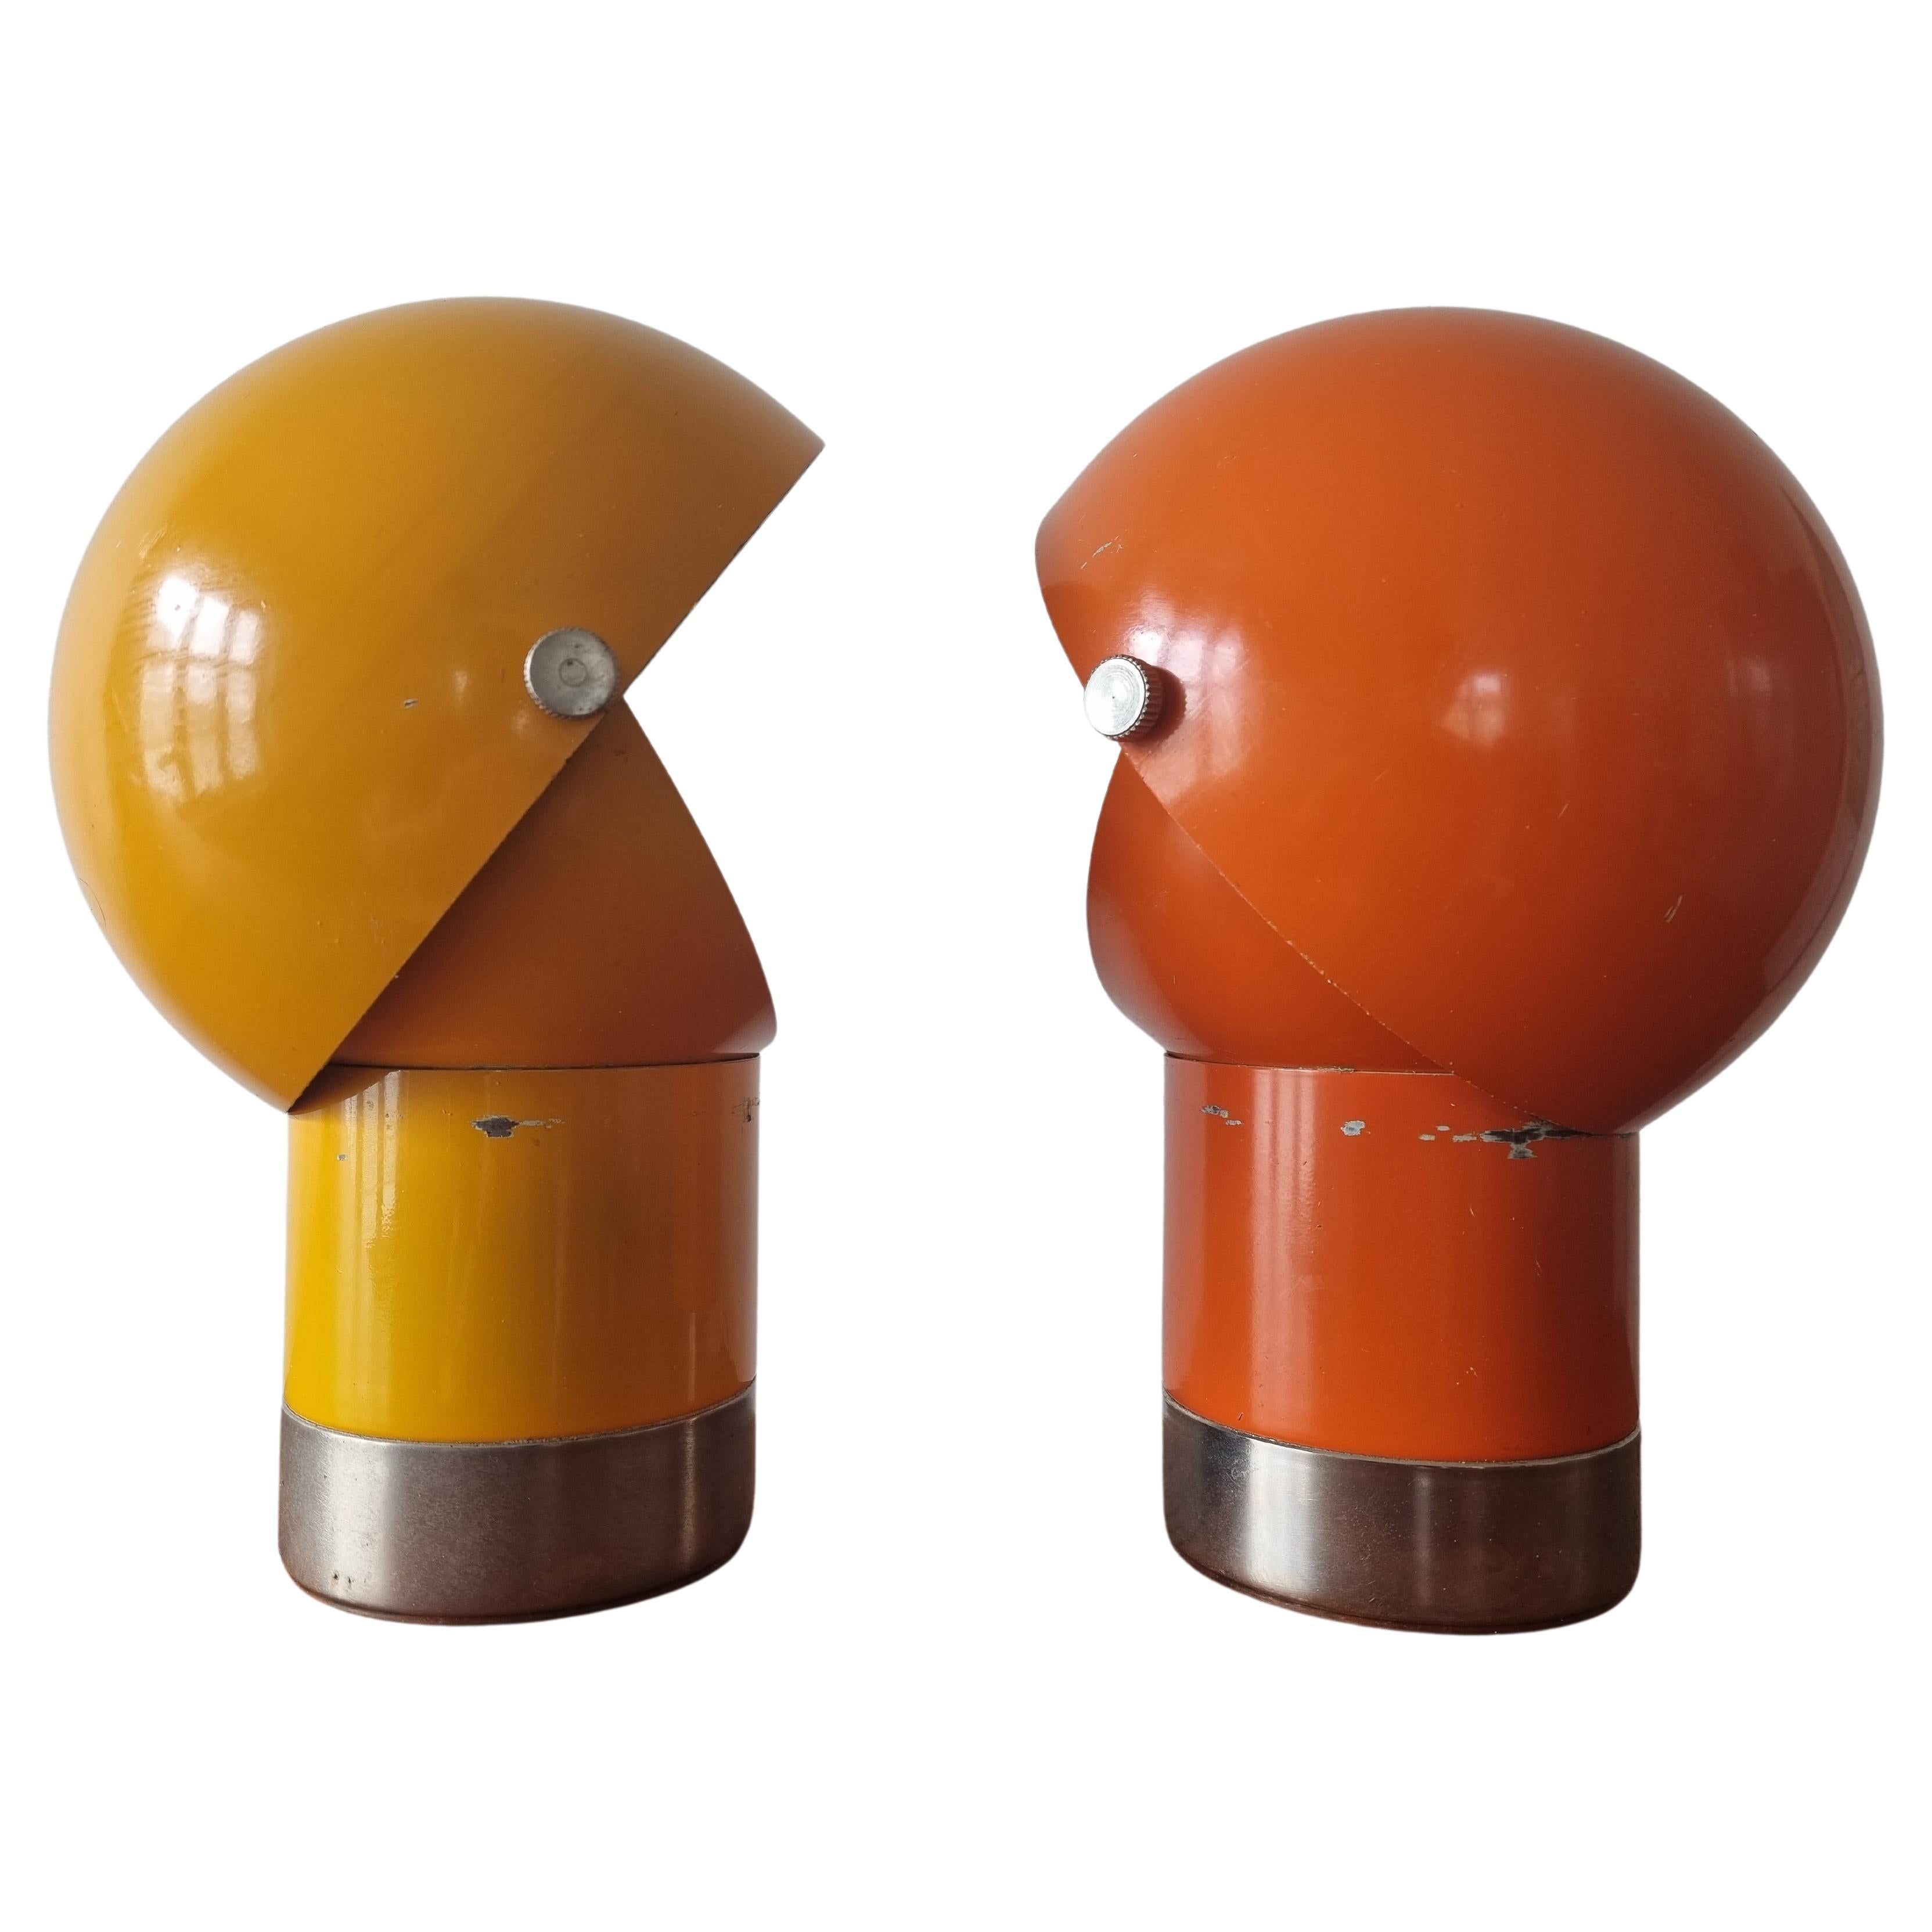 - rare type
- space age 
- very nice style of lighting
- marked by label
- E27 bulb
- adjustable
- table or wall.